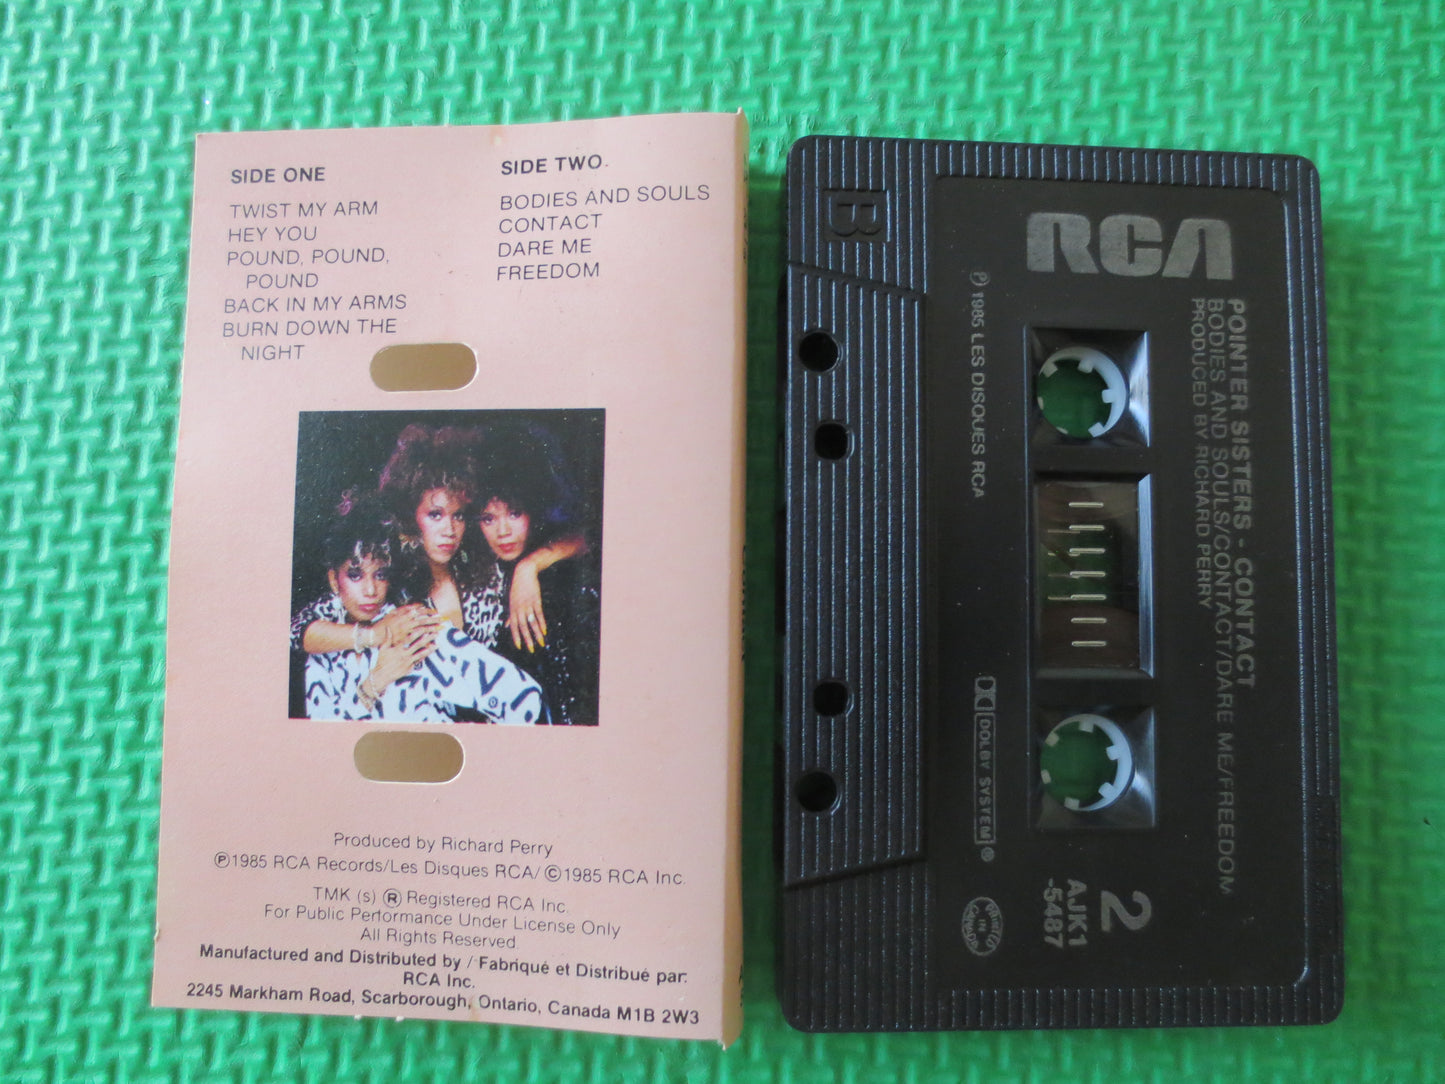 POINTER SISTERS, CONTACT, Pointer Sisters Tape, Disco Music, Tape Cassette, Disco Cassette, Dance Cassettes, 1985 Cassette